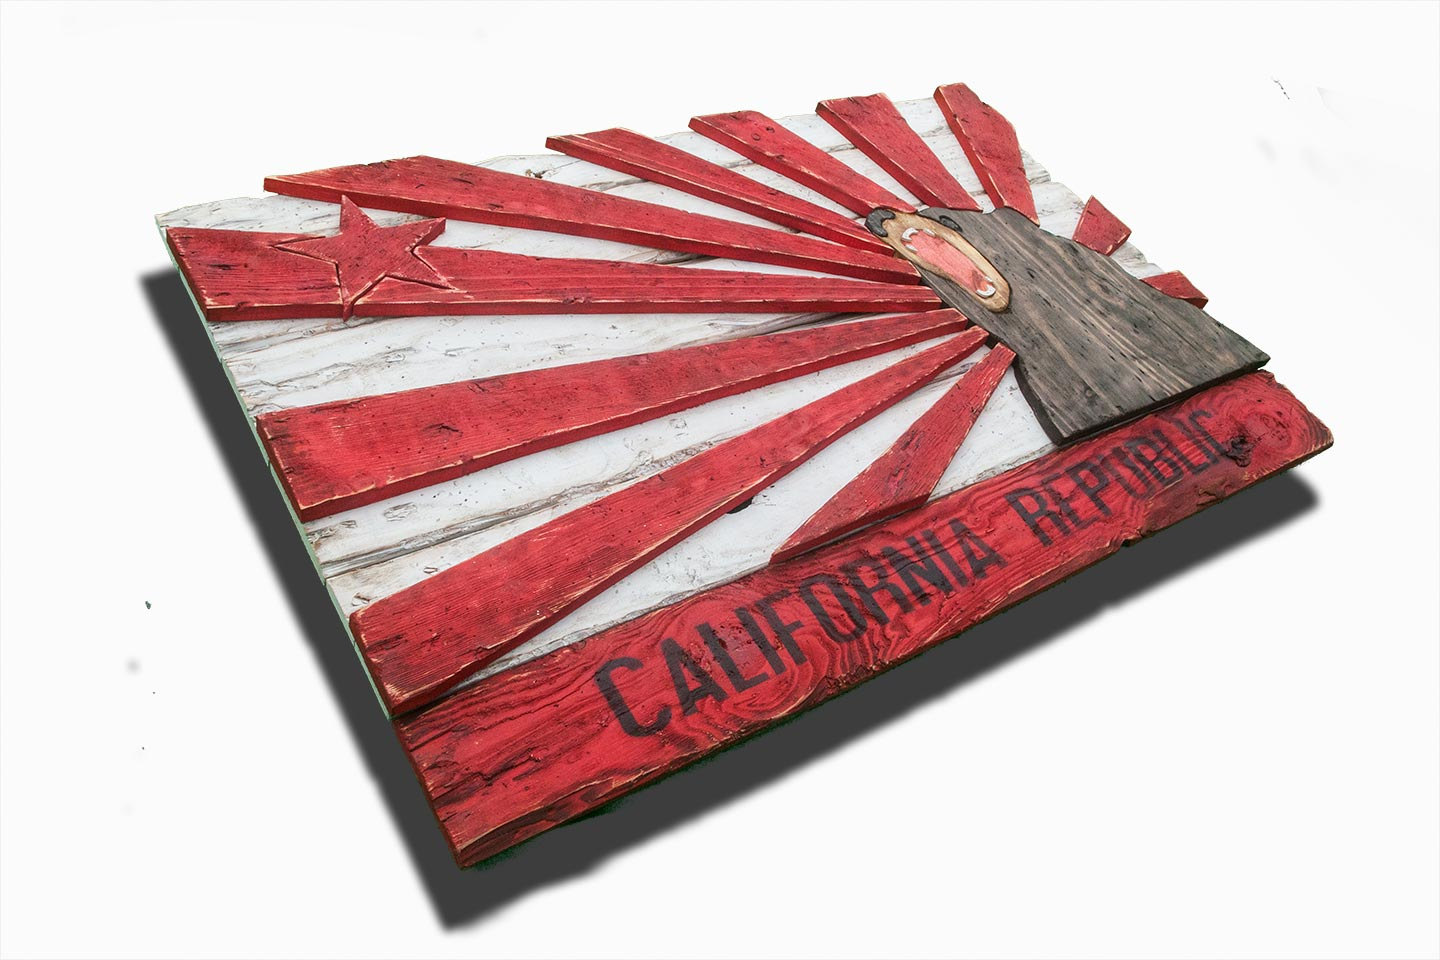 Weathered Wood One of a kind New edtion California Republic flag, Wooden, vintage, art, distressed, weathered, recycled, California flag art